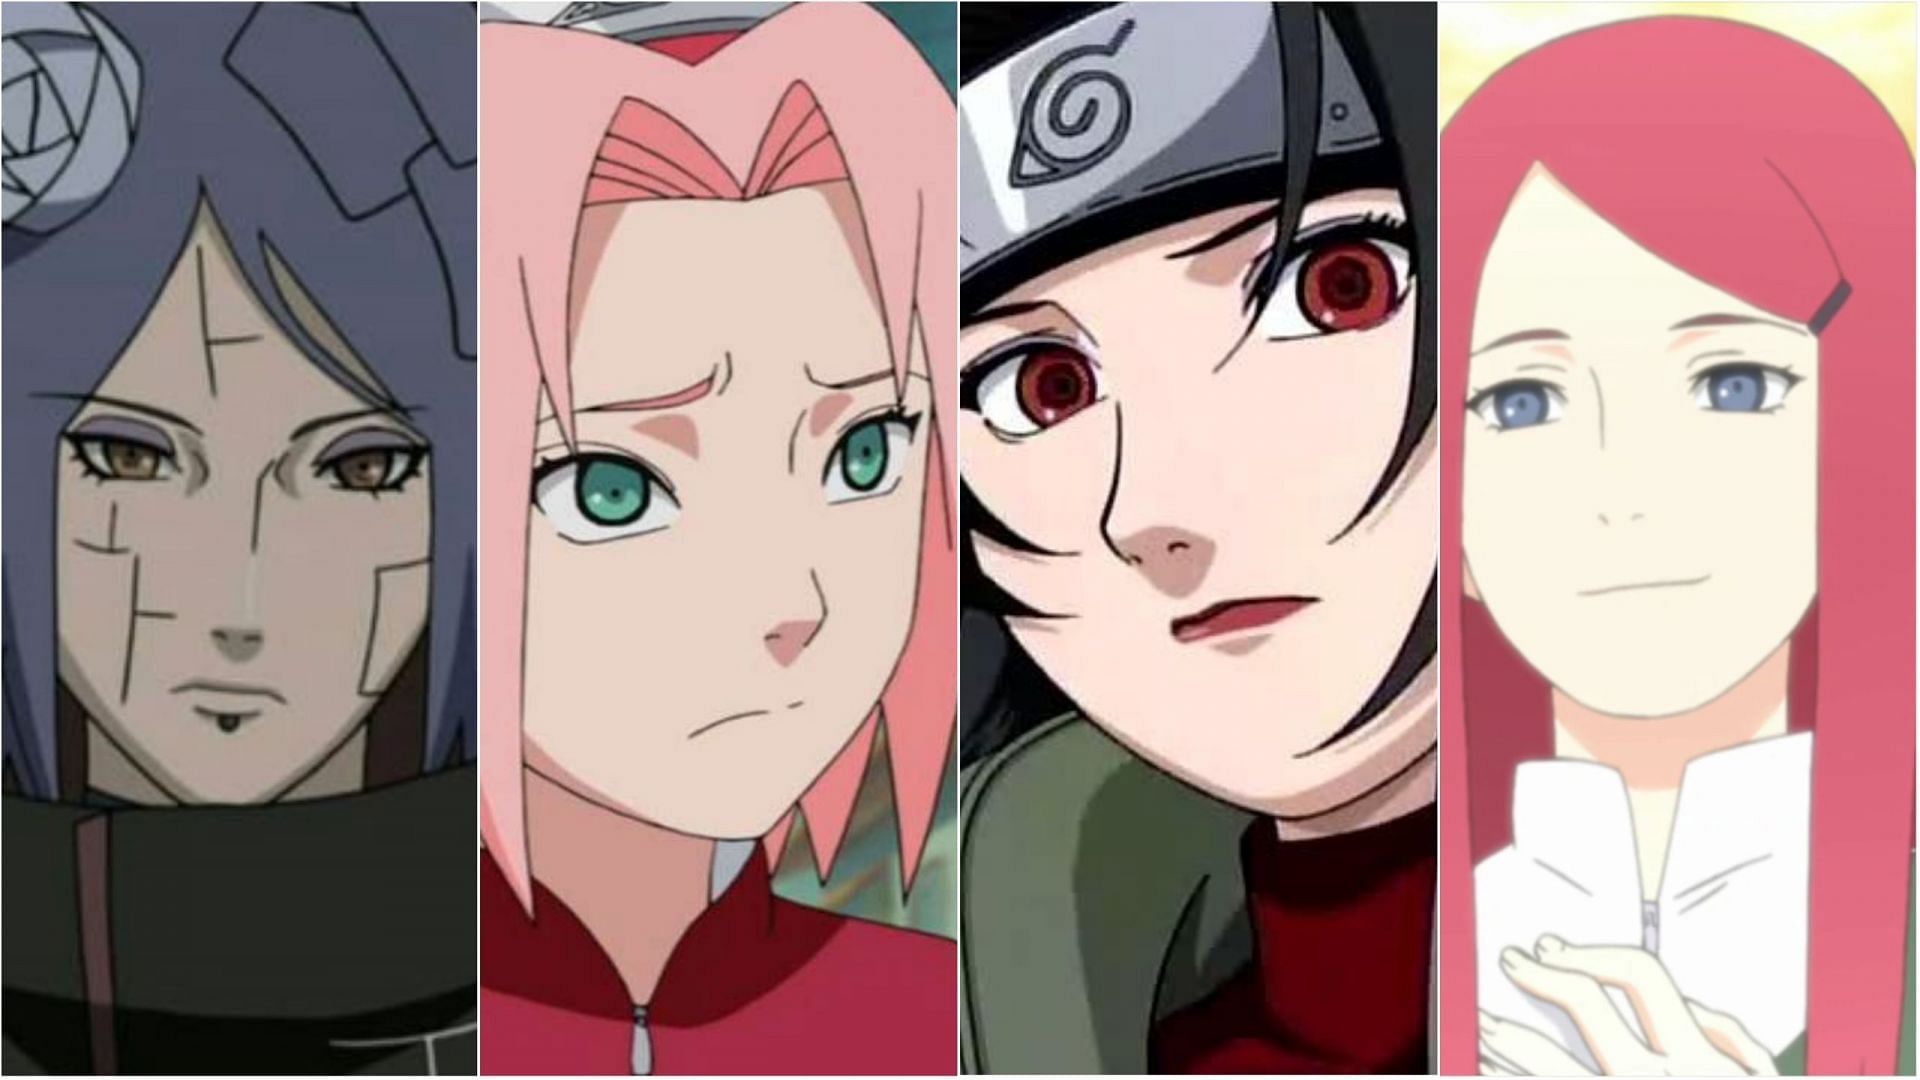 Wasted Potential: How 'Naruto' Failed Its Female Characters